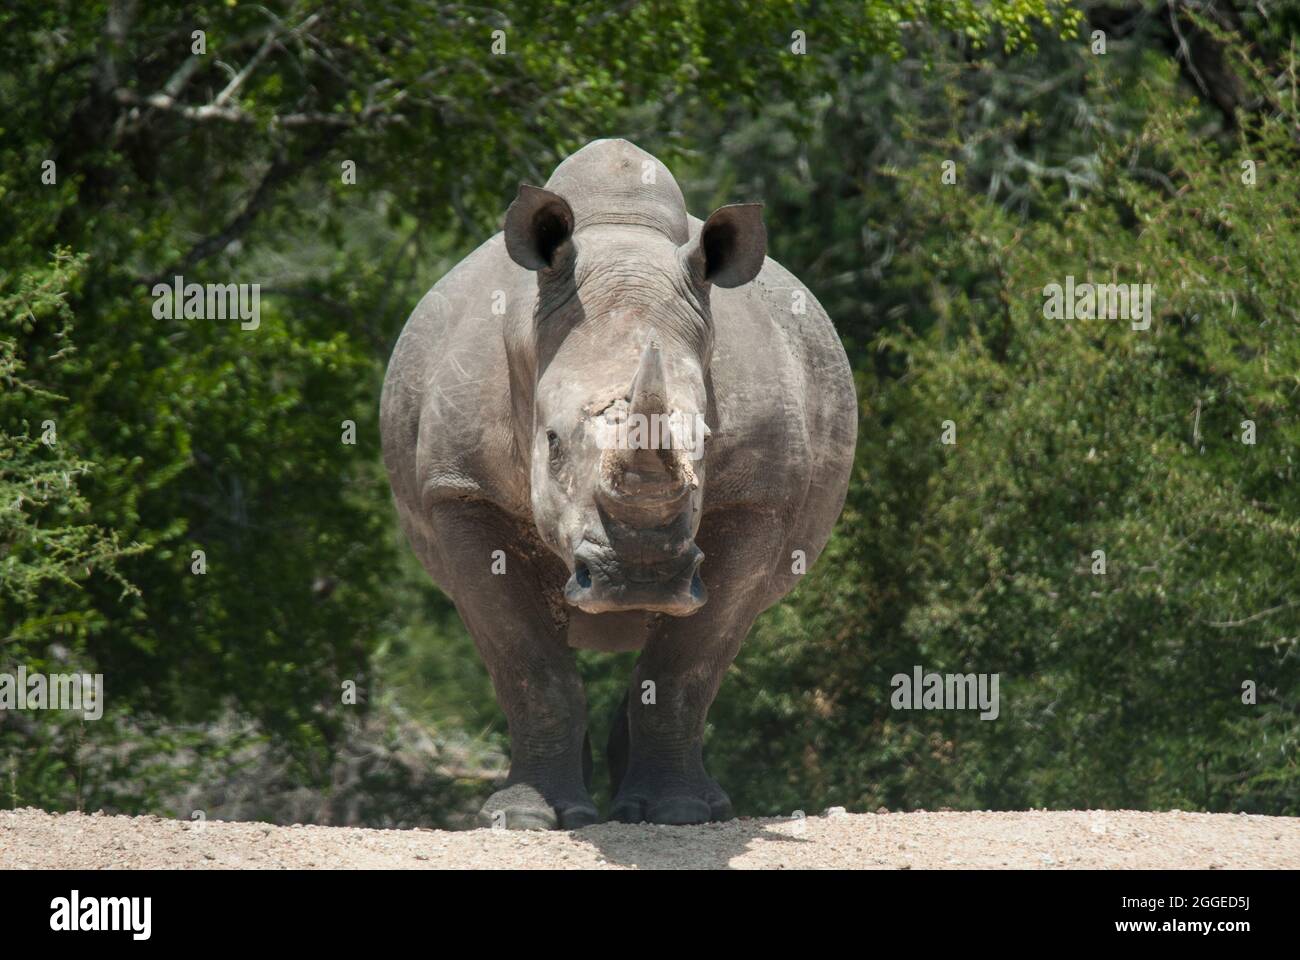 Large Southern White Rhinoceros (Ceratotherium simum simum) facing camera with green trees and bushed behind. Kruger National Park, South Africa. Stock Photo